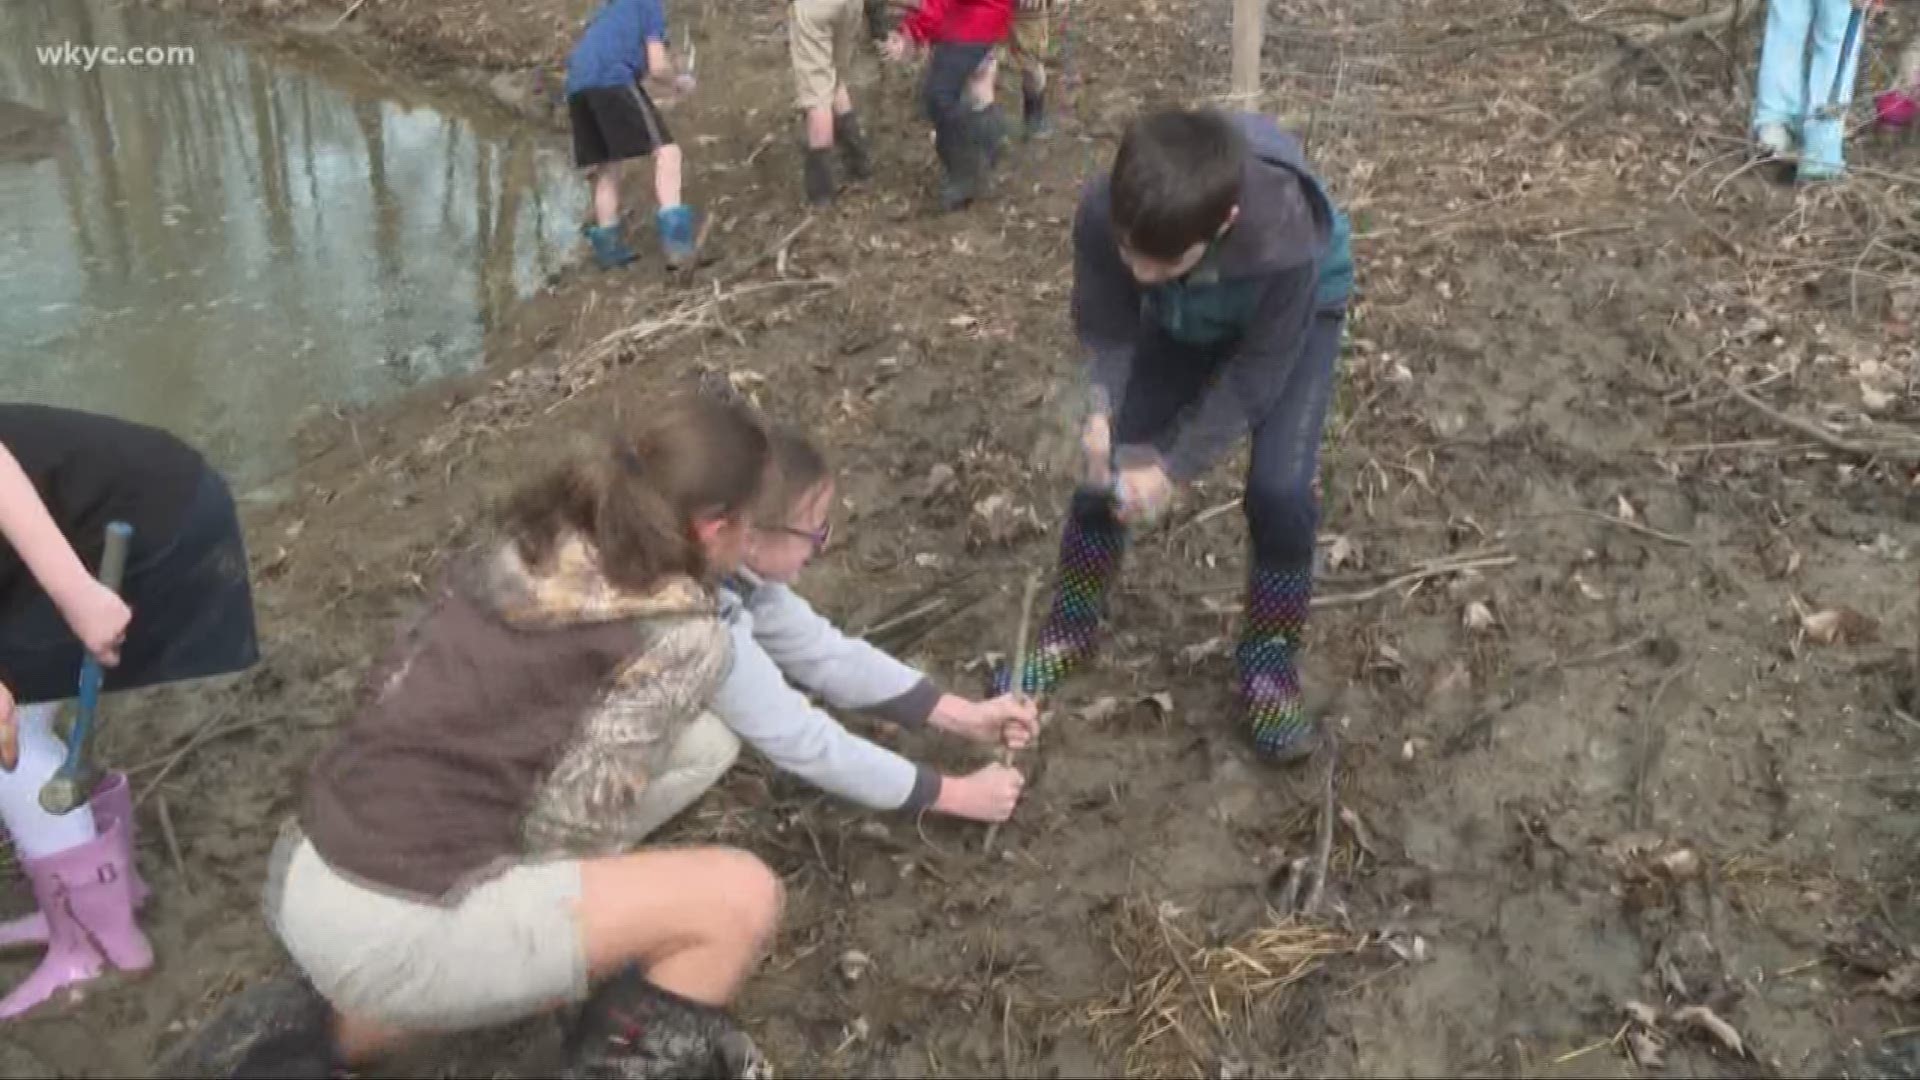 Girls in STEM: Students at Willoughby-Eastlake's School of Innovation help restore part of Euclid Creek